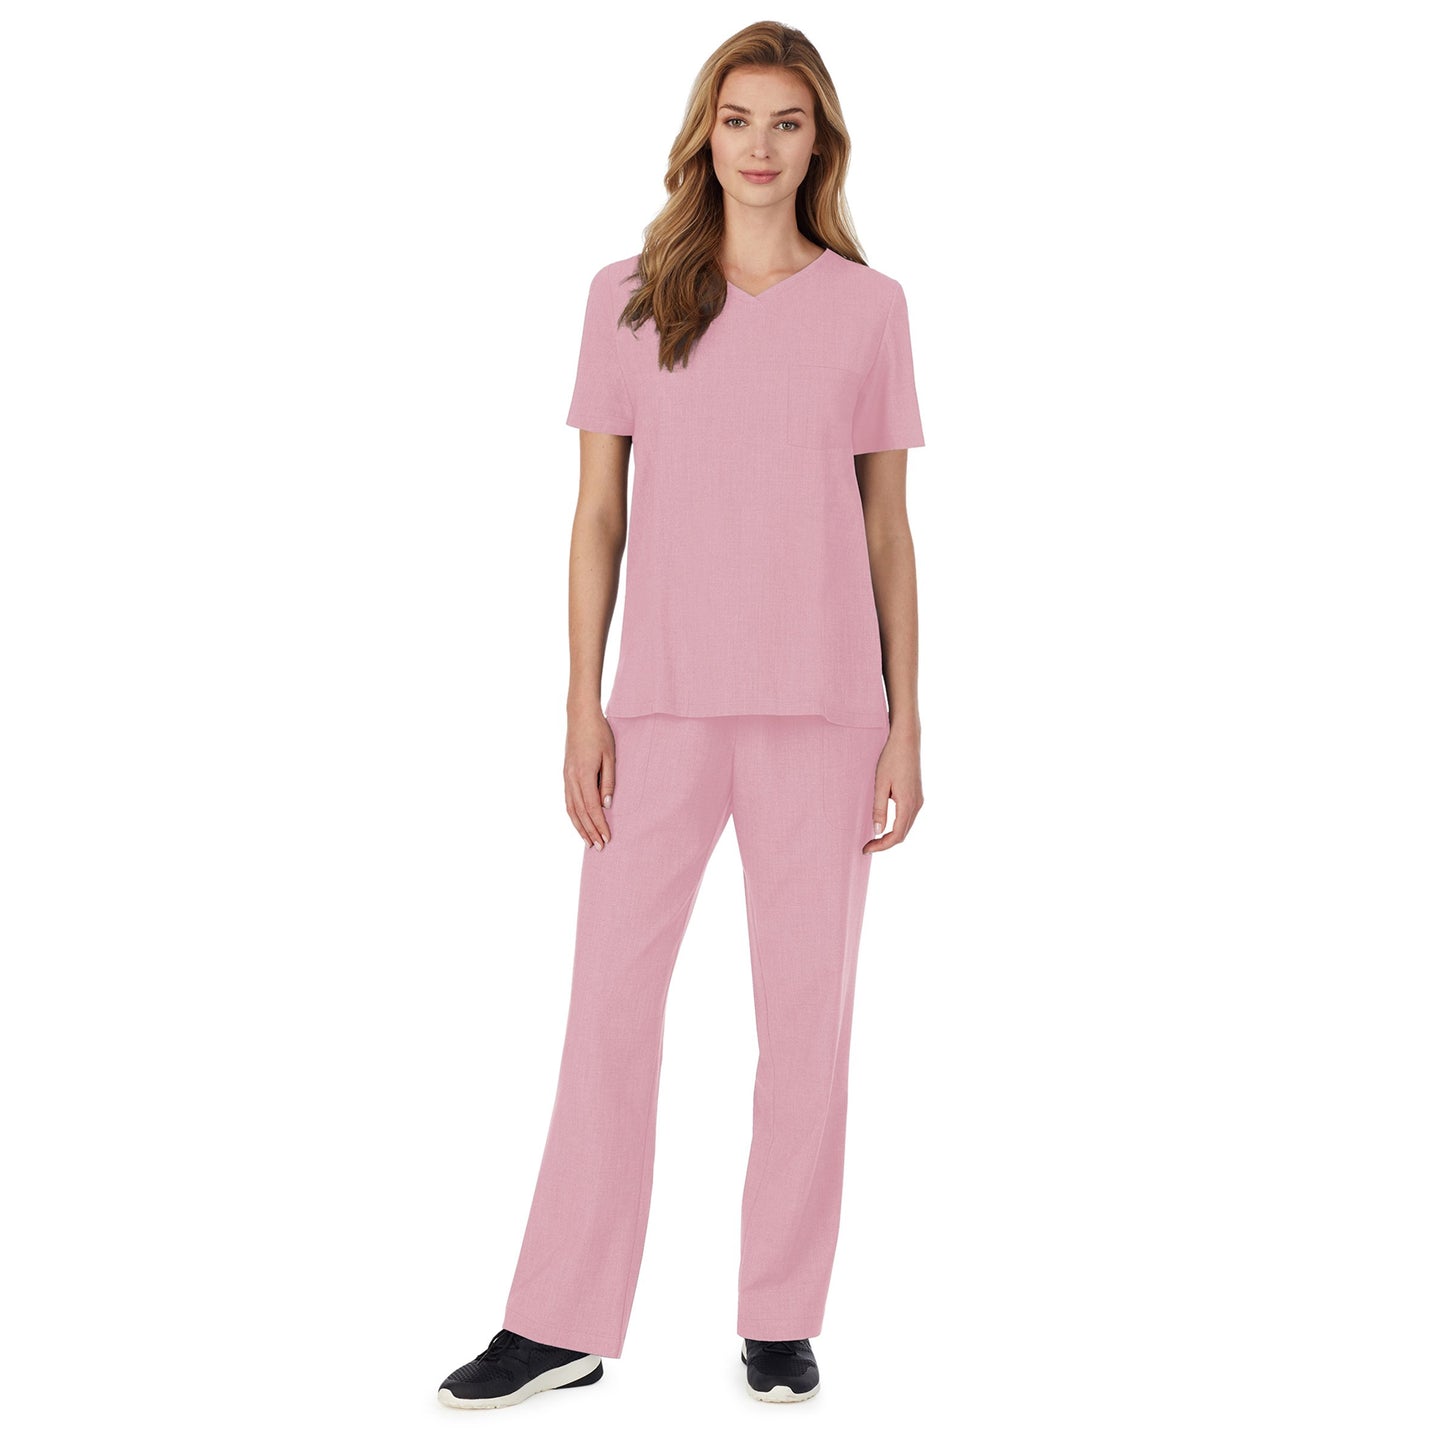 Cameo Pink Heather;Model is wearing size S. She is 5’9”, Bust 32”, Waist 23", Hips 34.5”.@A lady wearing Cameo Pink Heather short sleeve scrub v-neck top with chest pocket.